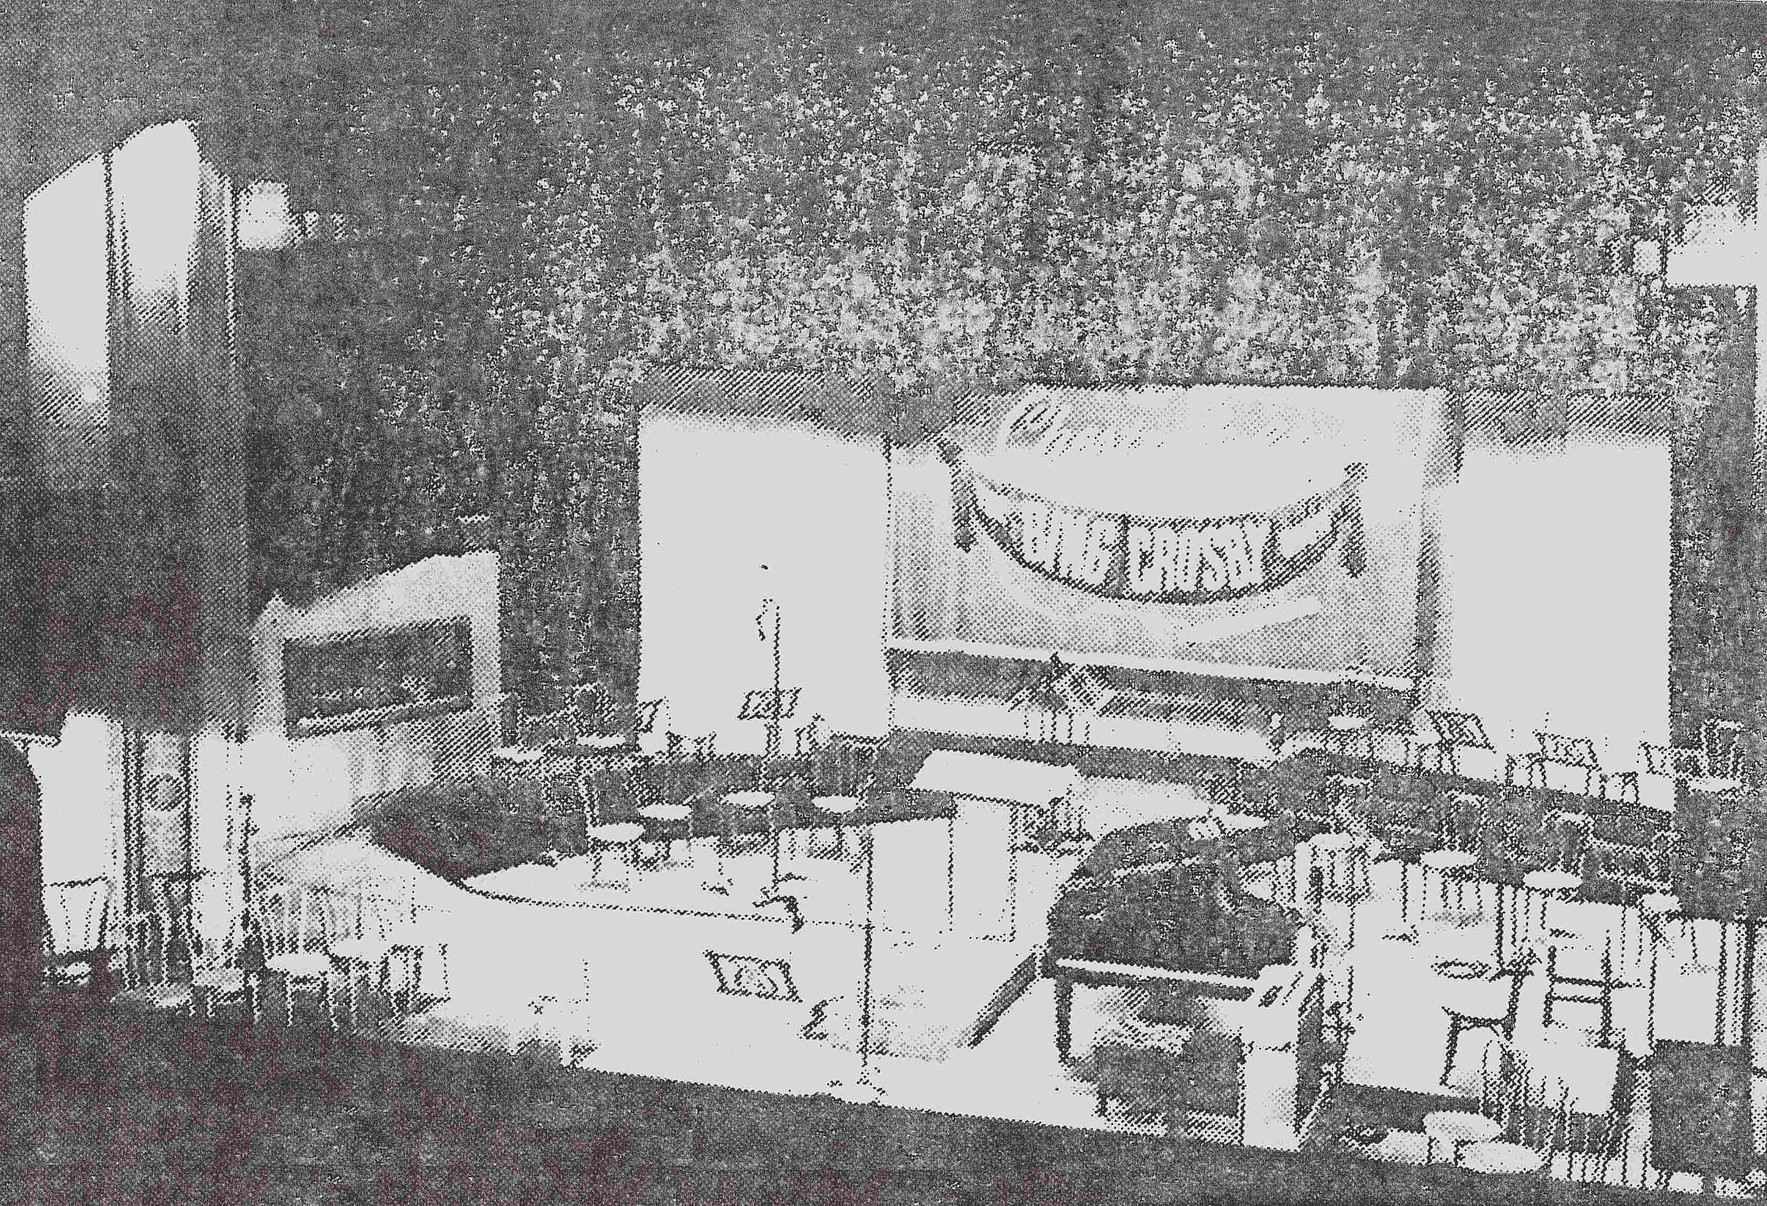 A rare although poor quality image of the Vine Street Theater (now The Montalban Theater), set-up for the Bing Crosby Show (Norm Dewes/BCE/RP)